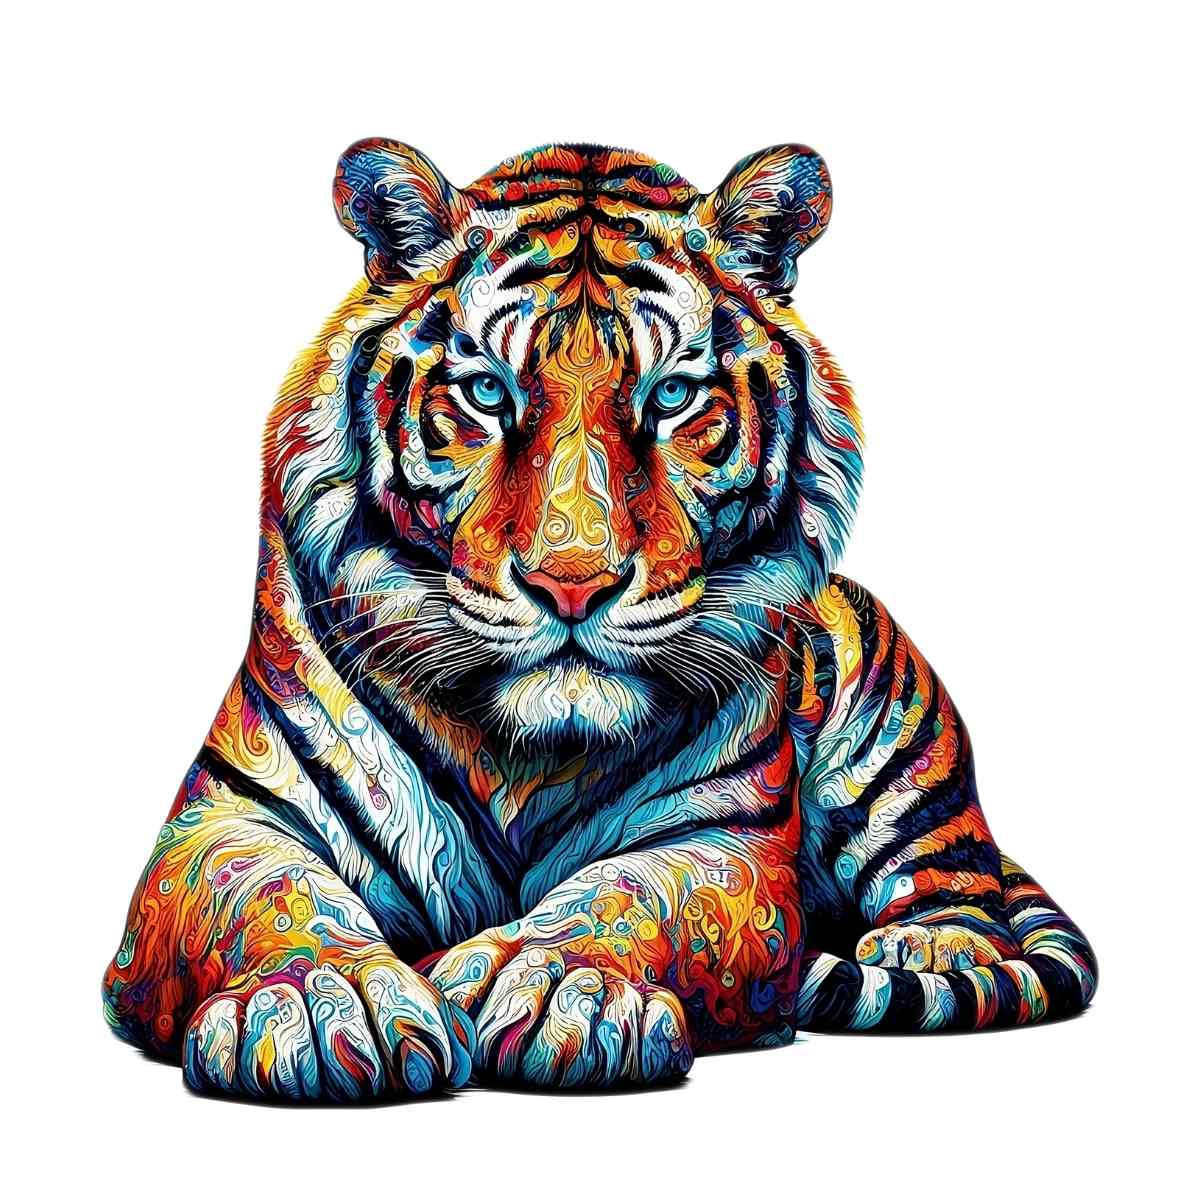 Animal Jigsaw Puzzle > Wooden Jigsaw Puzzle > Jigsaw Puzzle A5 Tiger - Jigsaw Puzzle